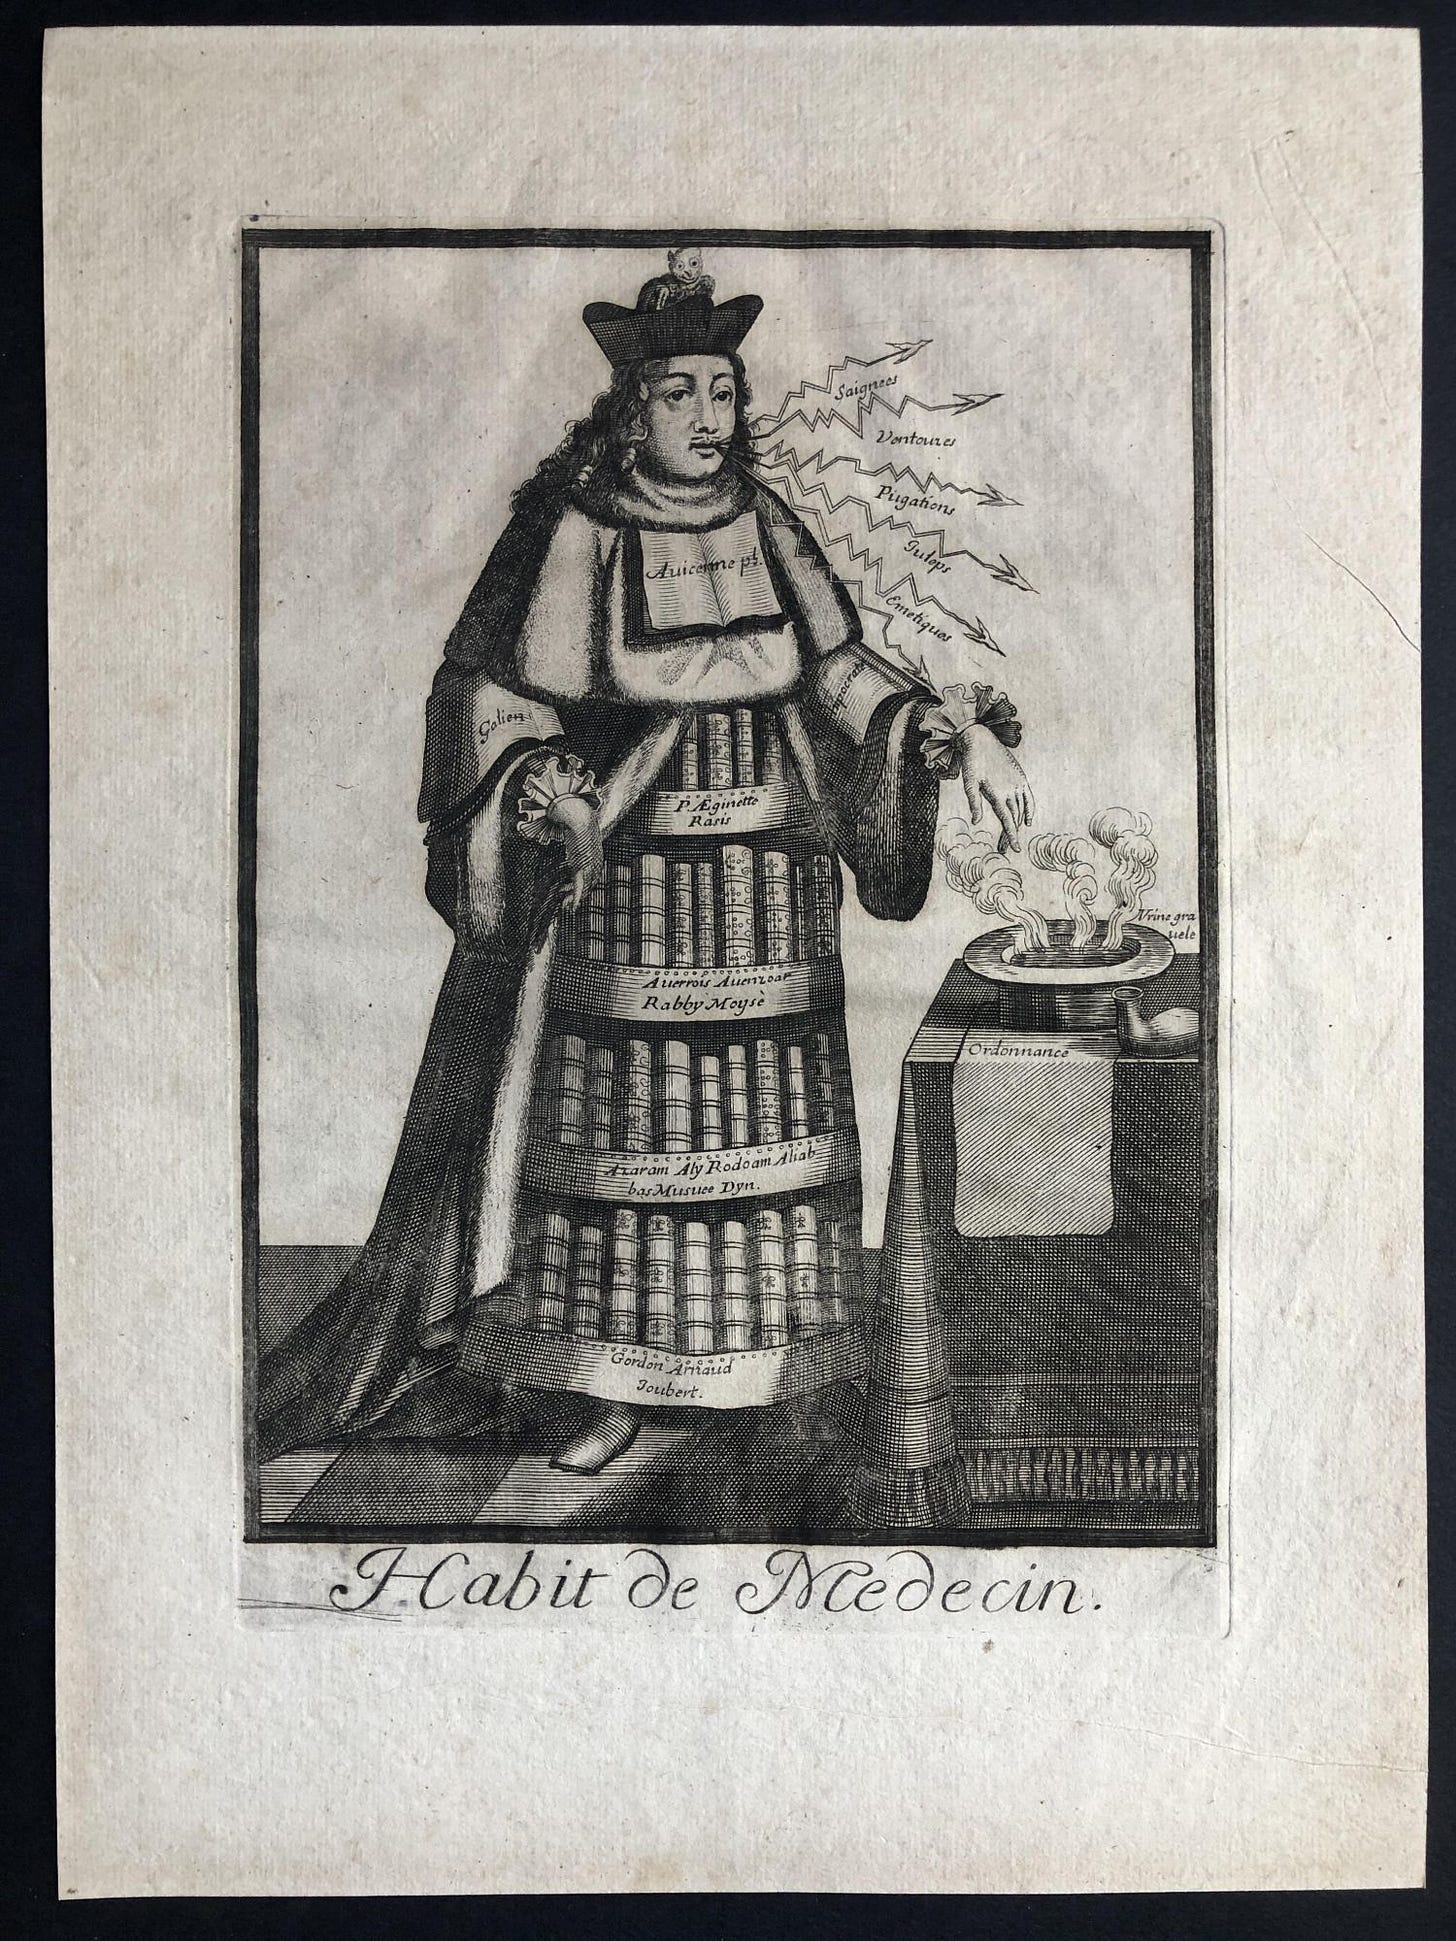 A black and white engraving of a man in long robes, which revealed show him to be made of books. Speech arrows emit from his mouth.